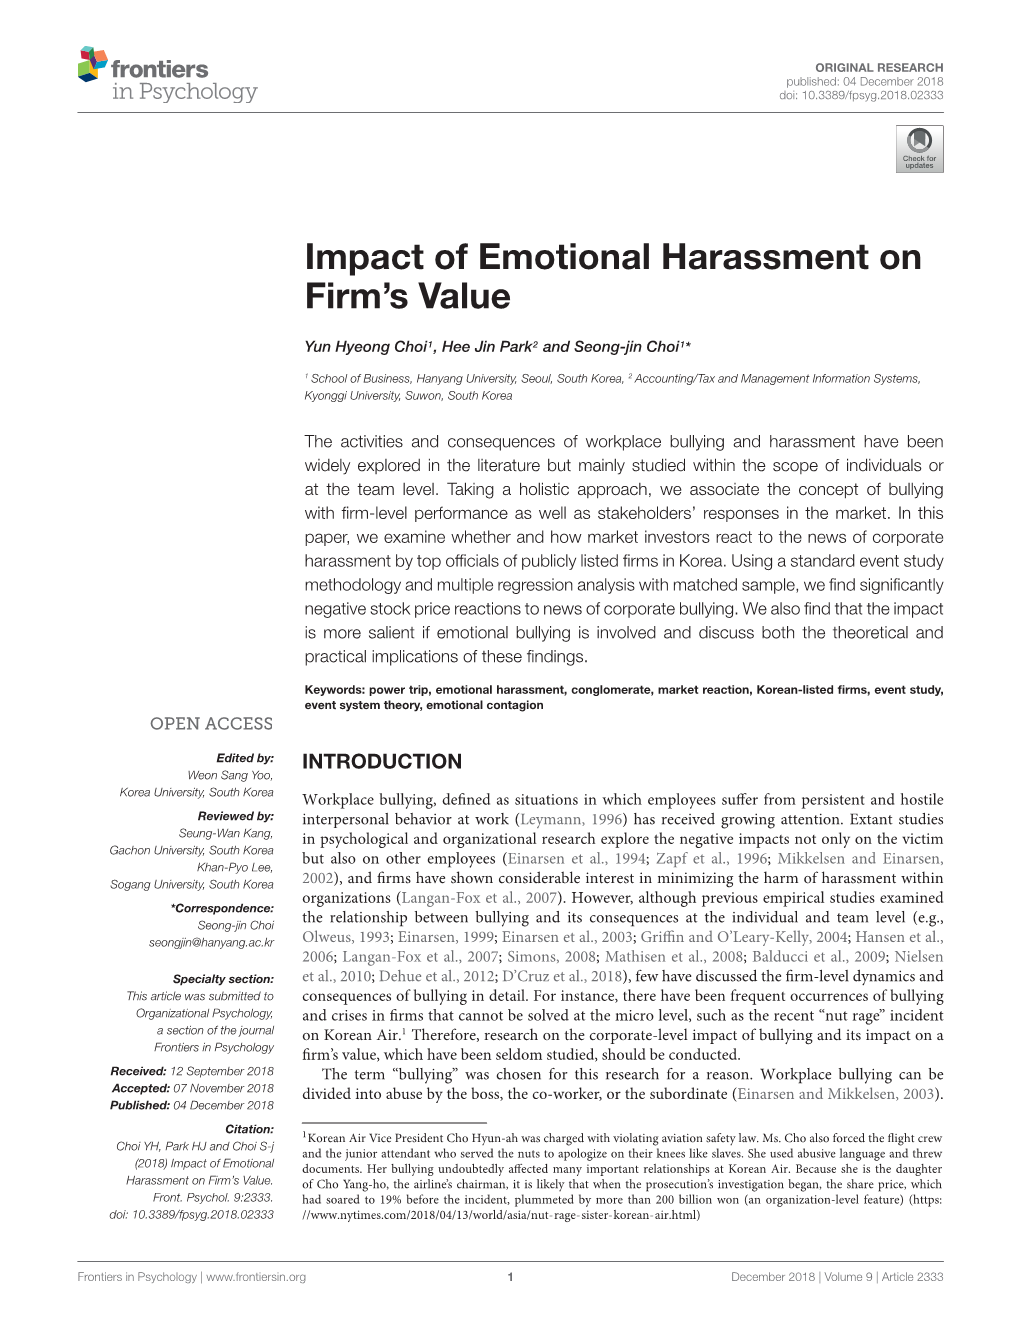 Impact of Emotional Harassment on Firm's Value